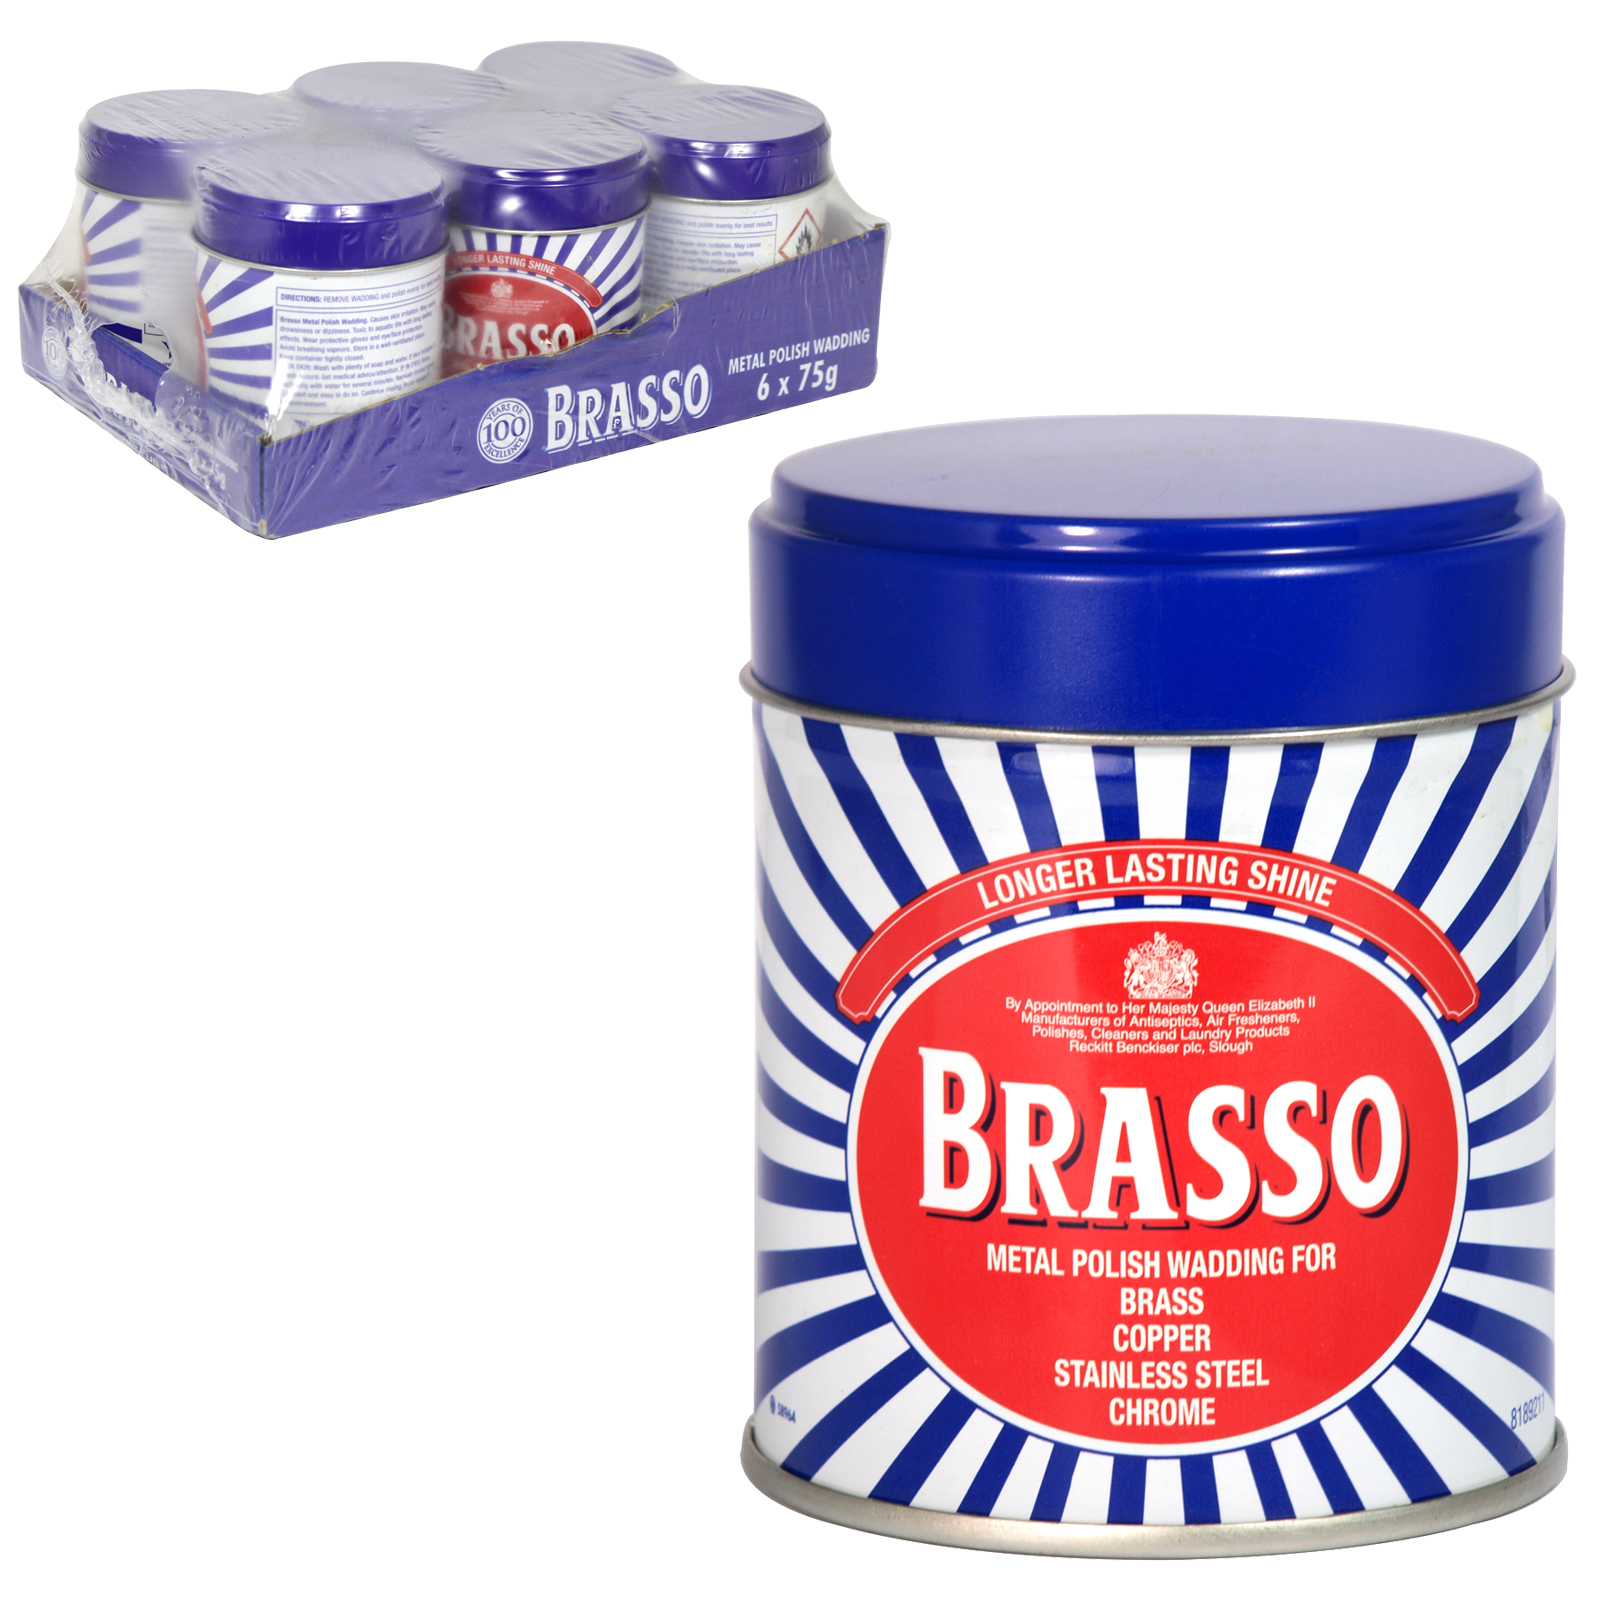 BRASSO METAL POLISH WADDLING FOR BRASS COPPER STAINLESS STEEL CROME 75G 